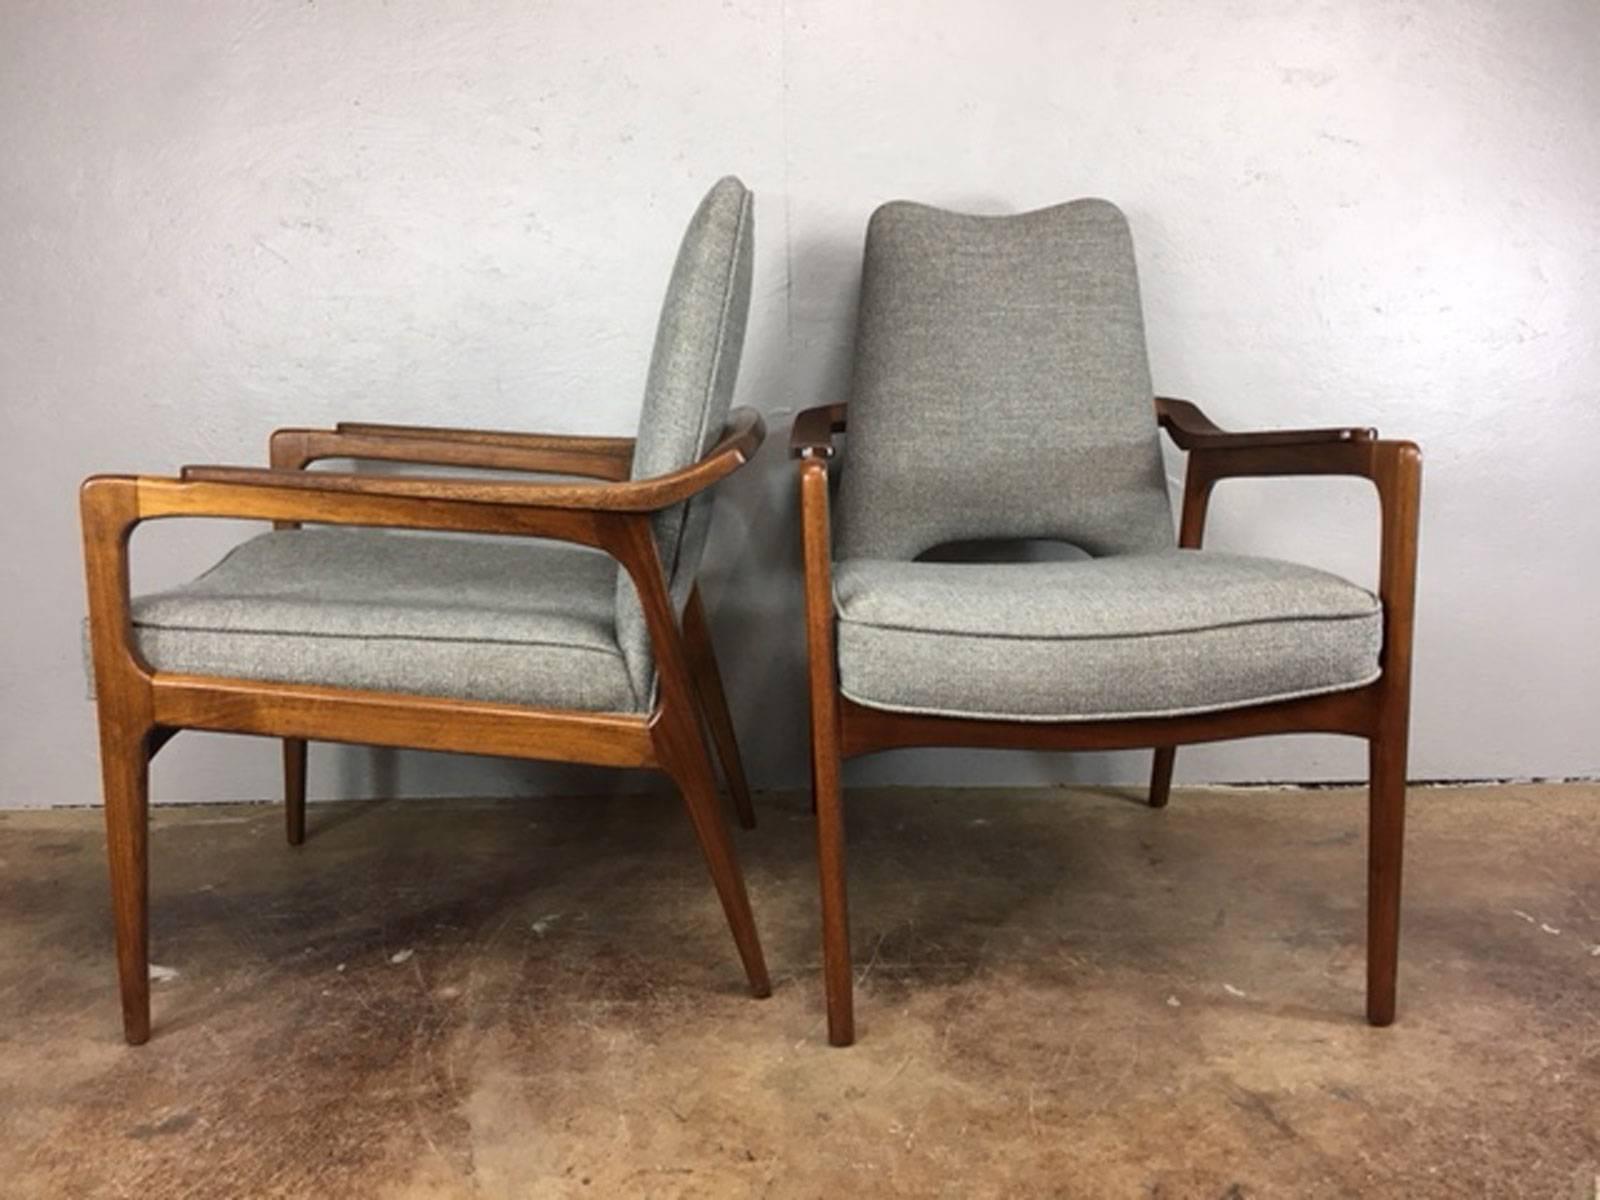 These chairs are early 1950s and are attributed to Adrian Pearsall who designed many lounge chairs in this style. The wood has been restored and is very nice.  And these chairs have also been newly reupholstered in the California 100% new polyester